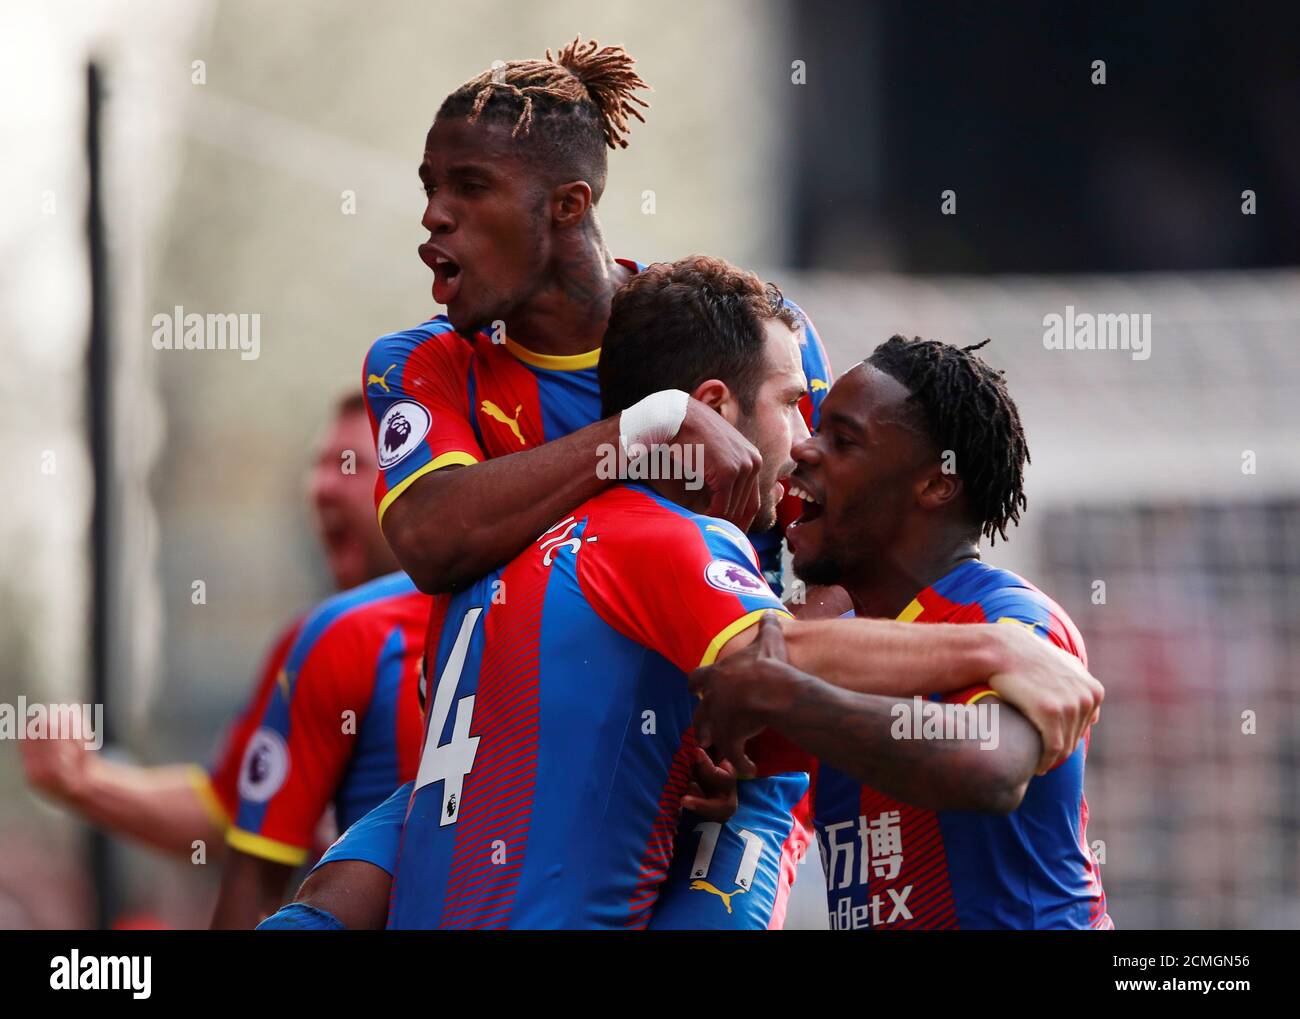 Soccer Football - Premier League - Crystal Palace v Huddersfield Town - Selhurst Park, London, Britain - March 30, 2019  Crystal Palace's Luka Milivojevic celebrates scoring their first goal with team mates    Action Images via Reuters/Andrew Couldridge  EDITORIAL USE ONLY. No use with unauthorized audio, video, data, fixture lists, club/league logos or 'live' services. Online in-match use limited to 75 images, no video emulation. No use in betting, games or single club/league/player publications.  Please contact your account representative for further details. Stock Photo